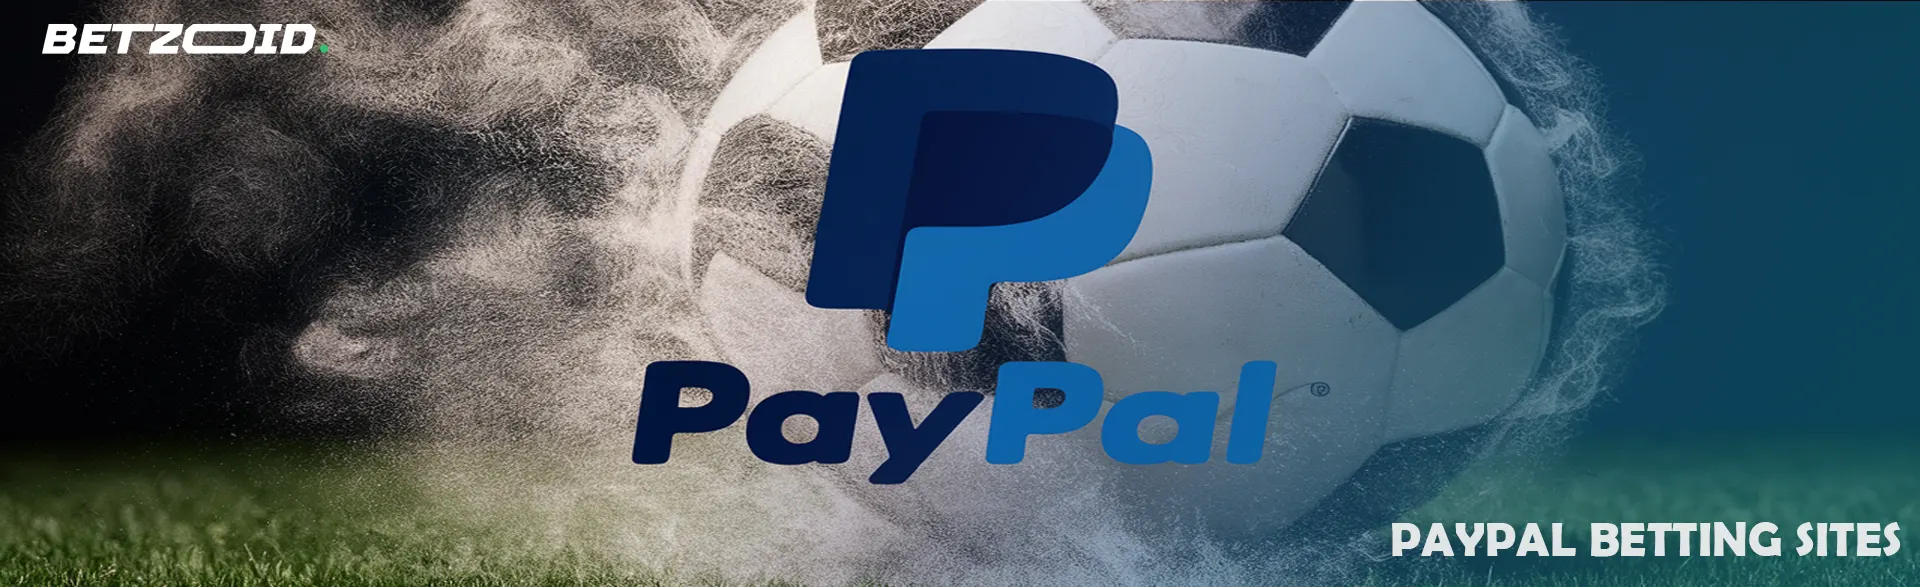 Betting Sites with PayPal in Australia - Betzoid.